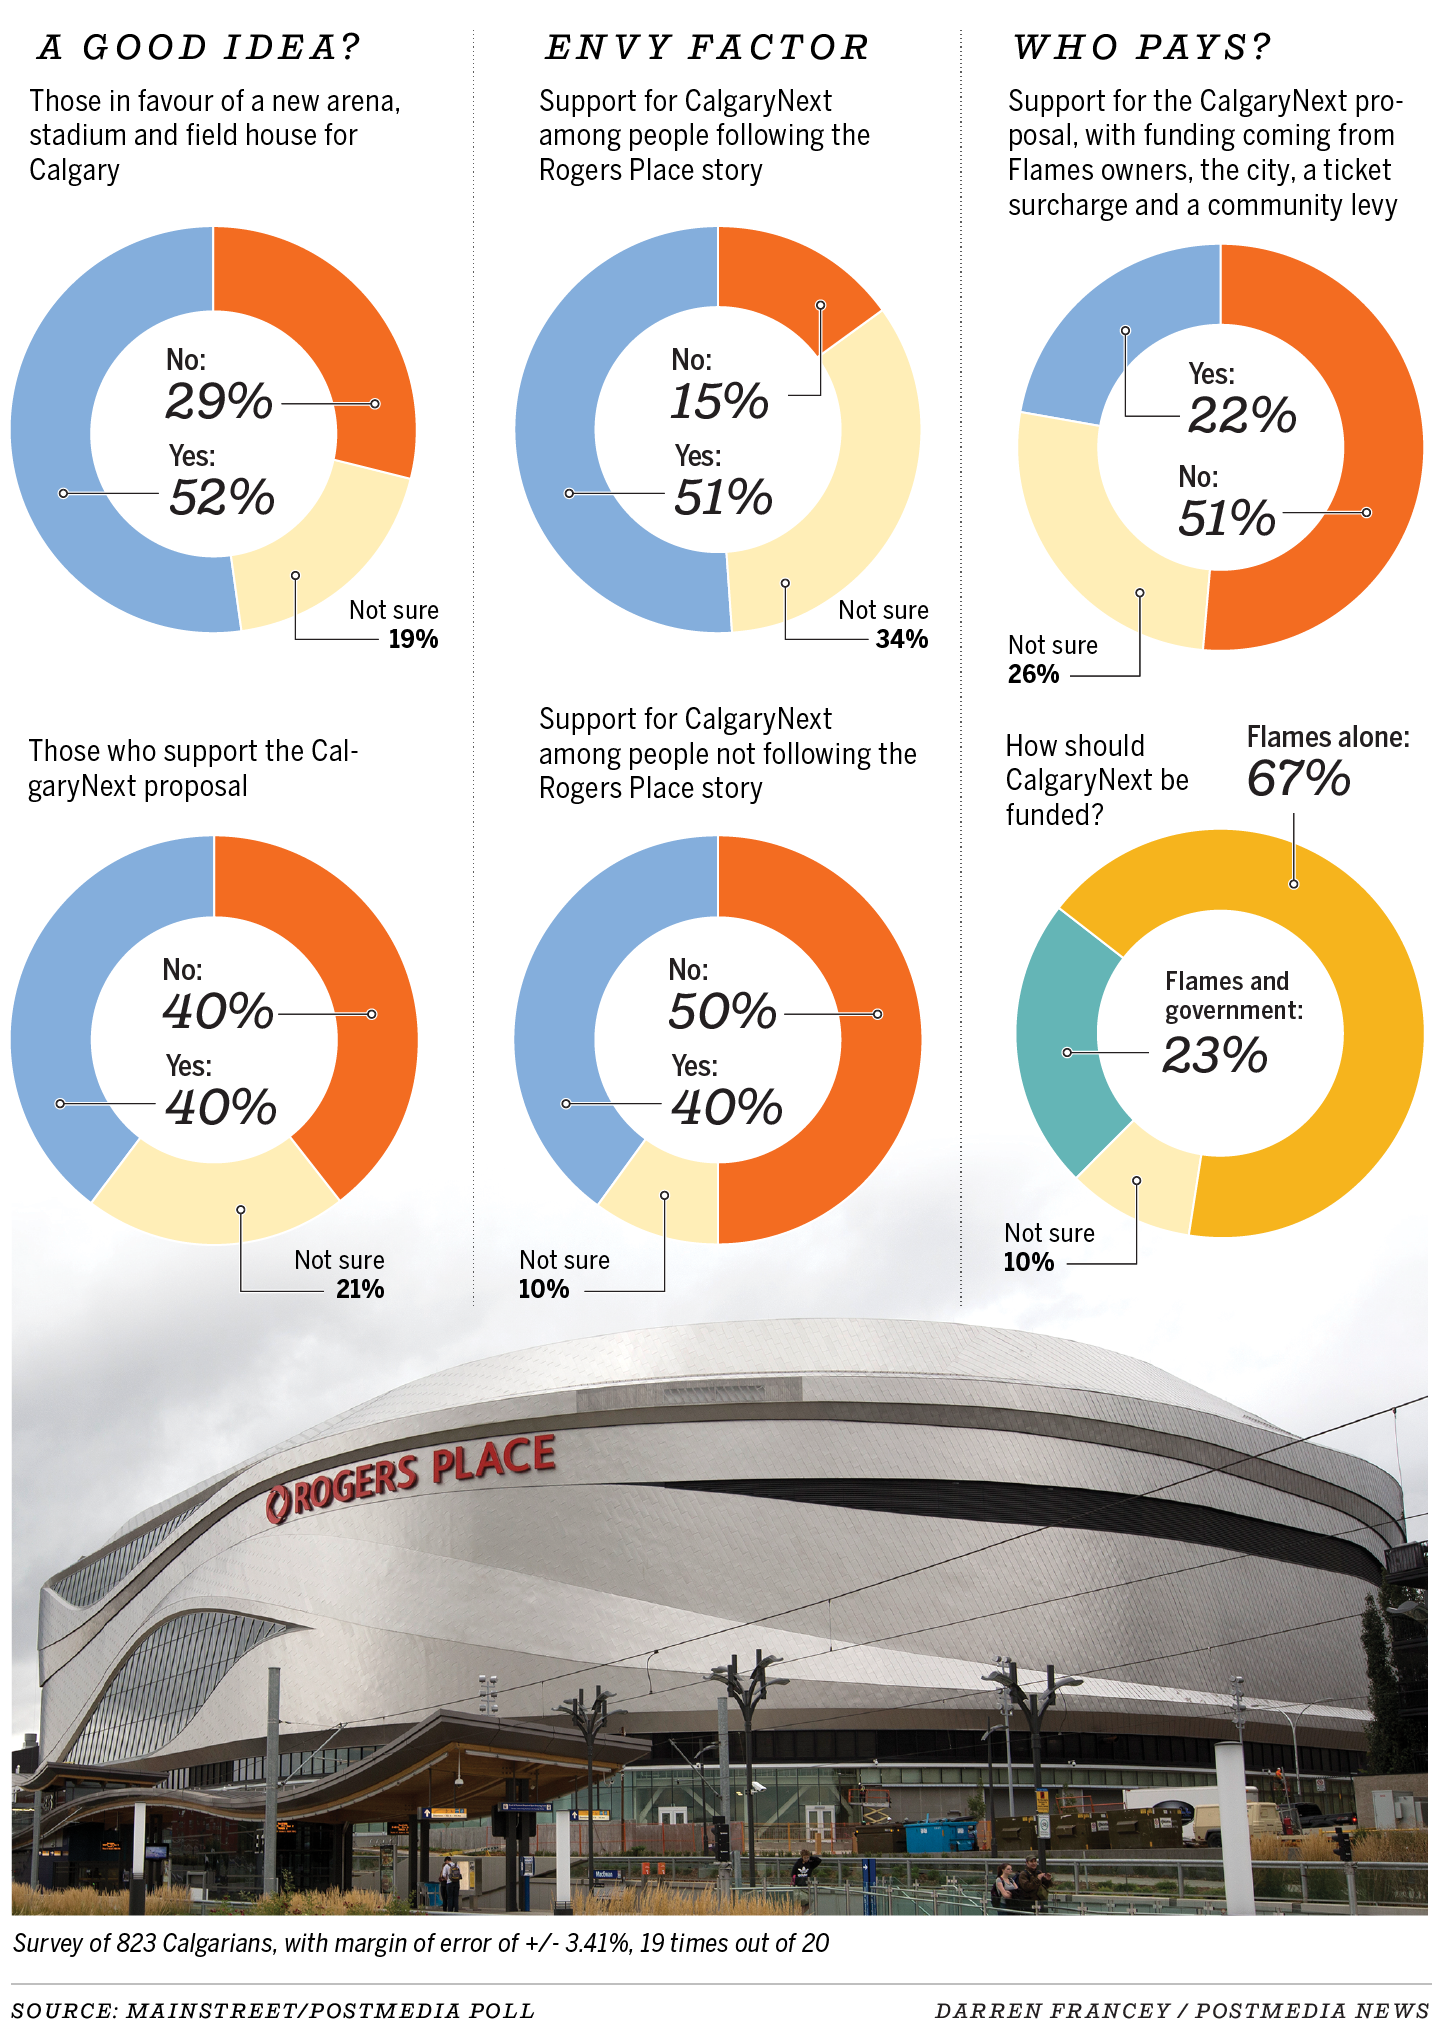 Poll measures Calgarians' opinion on CalgaryNext proposal for new arena, stadium and field house.